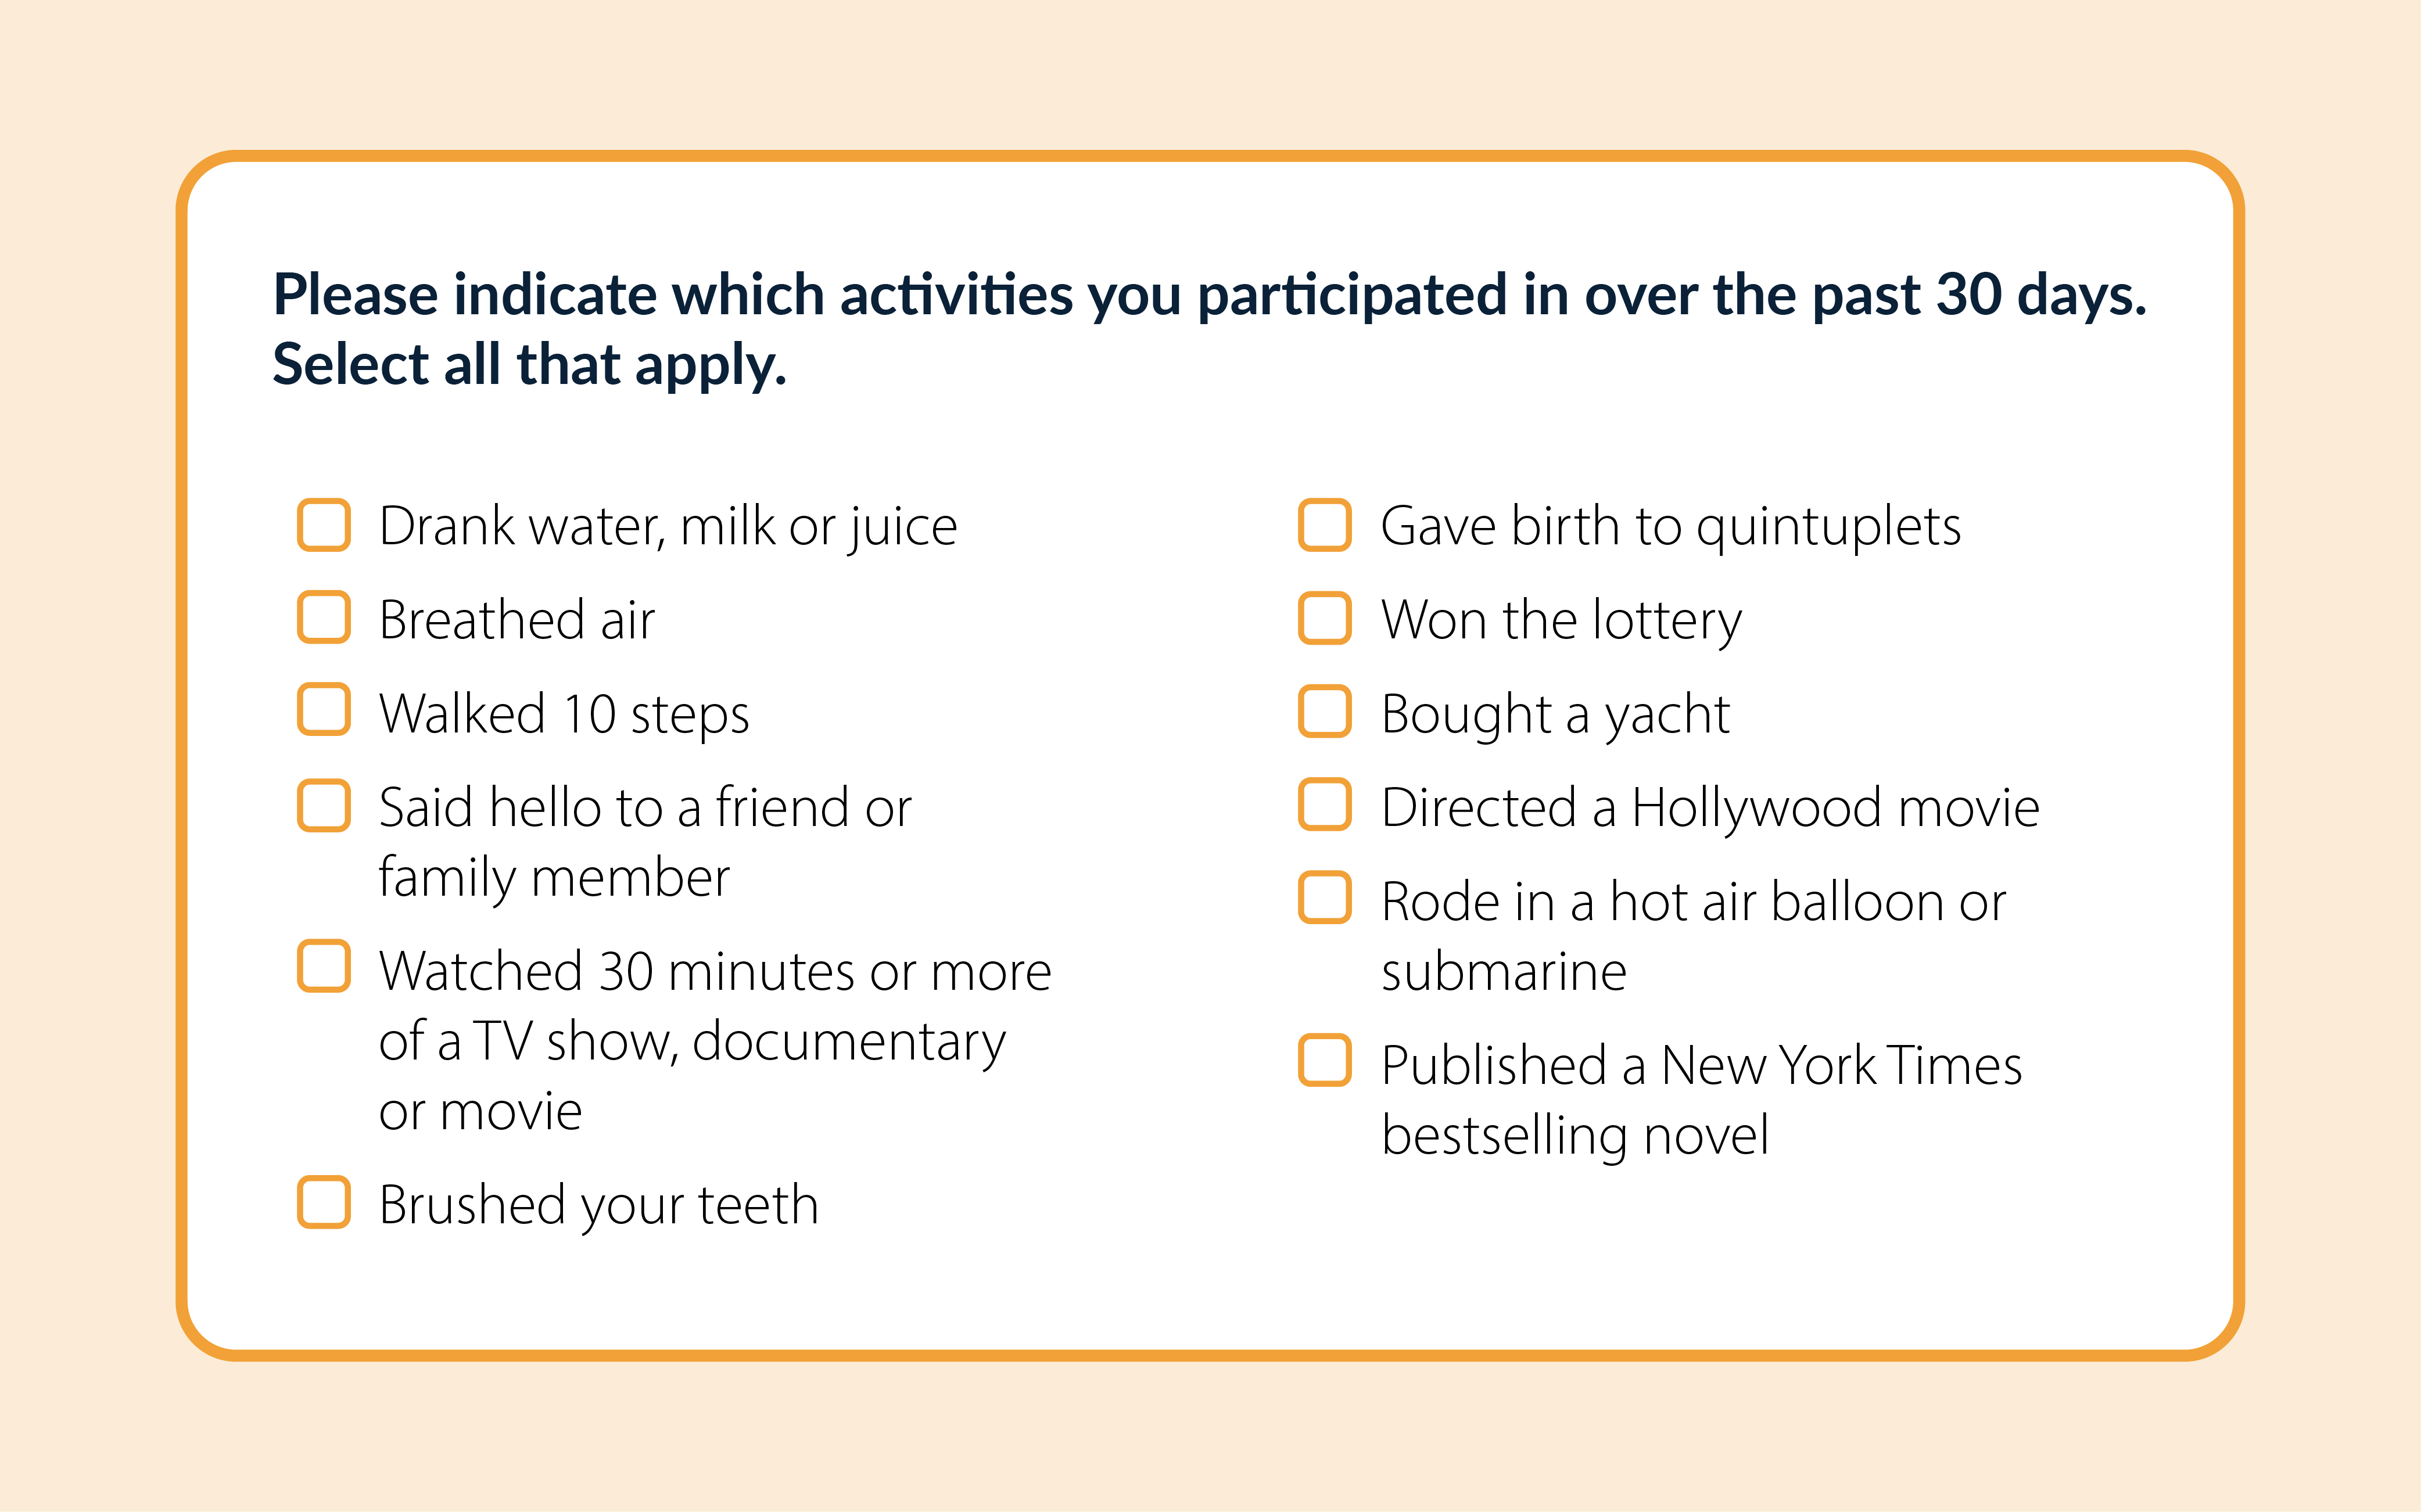 Please indicate which activities you participated in over the past 30 days. Select all that apply.